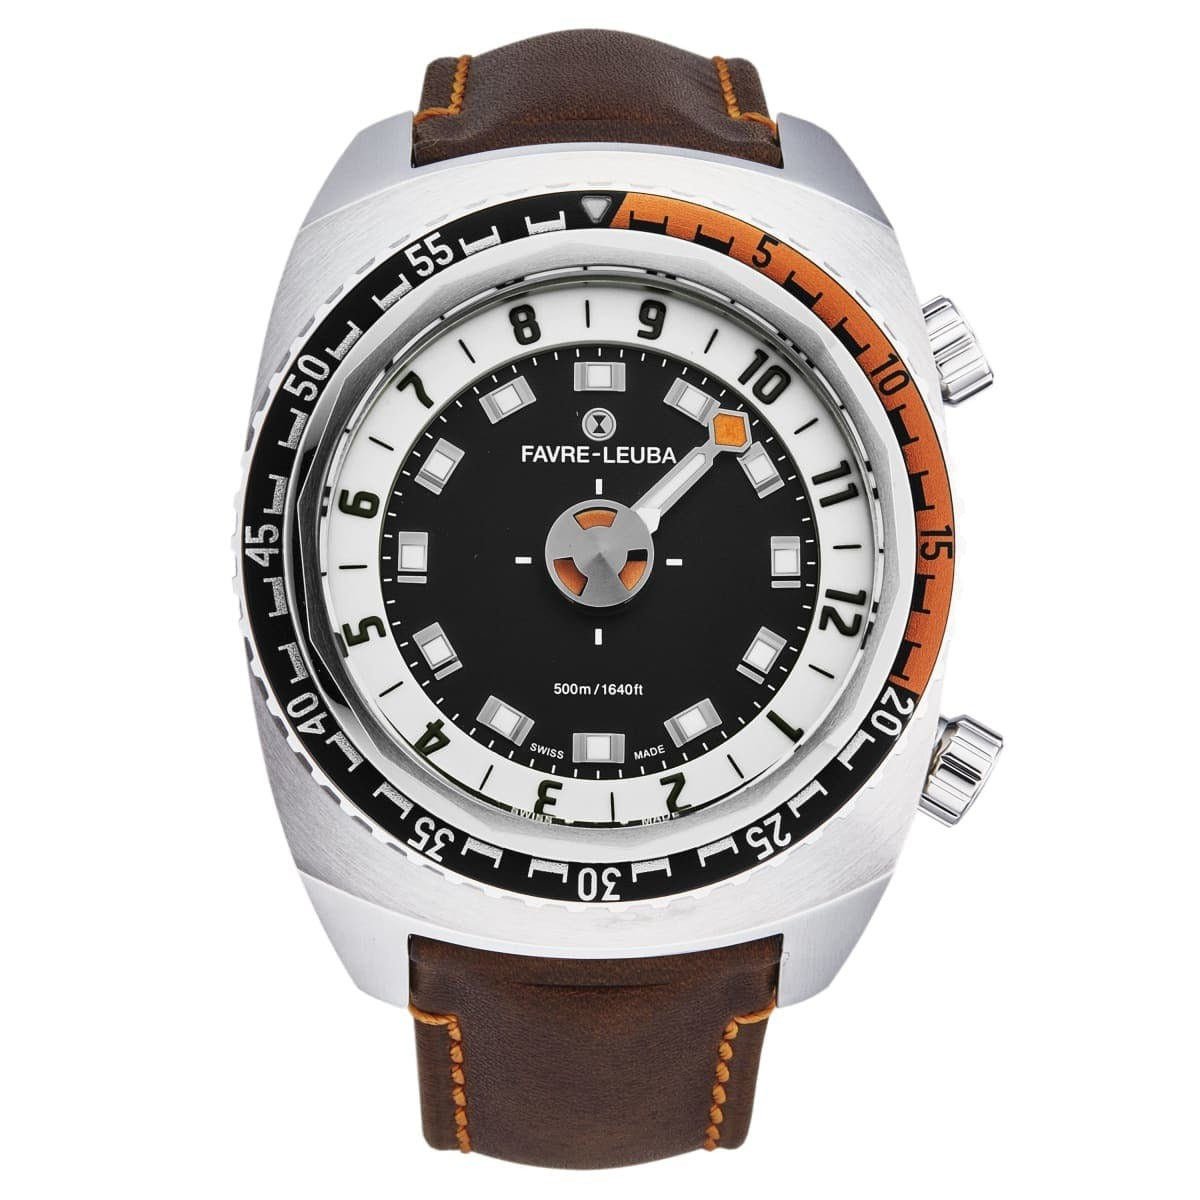 An Favre-Leuba Men's 00.10101.08.13.44 'Raider Harpoon' Black White Dial Brown Leather Strap Automatic Watch, with a black and orange color scheme set against a white background